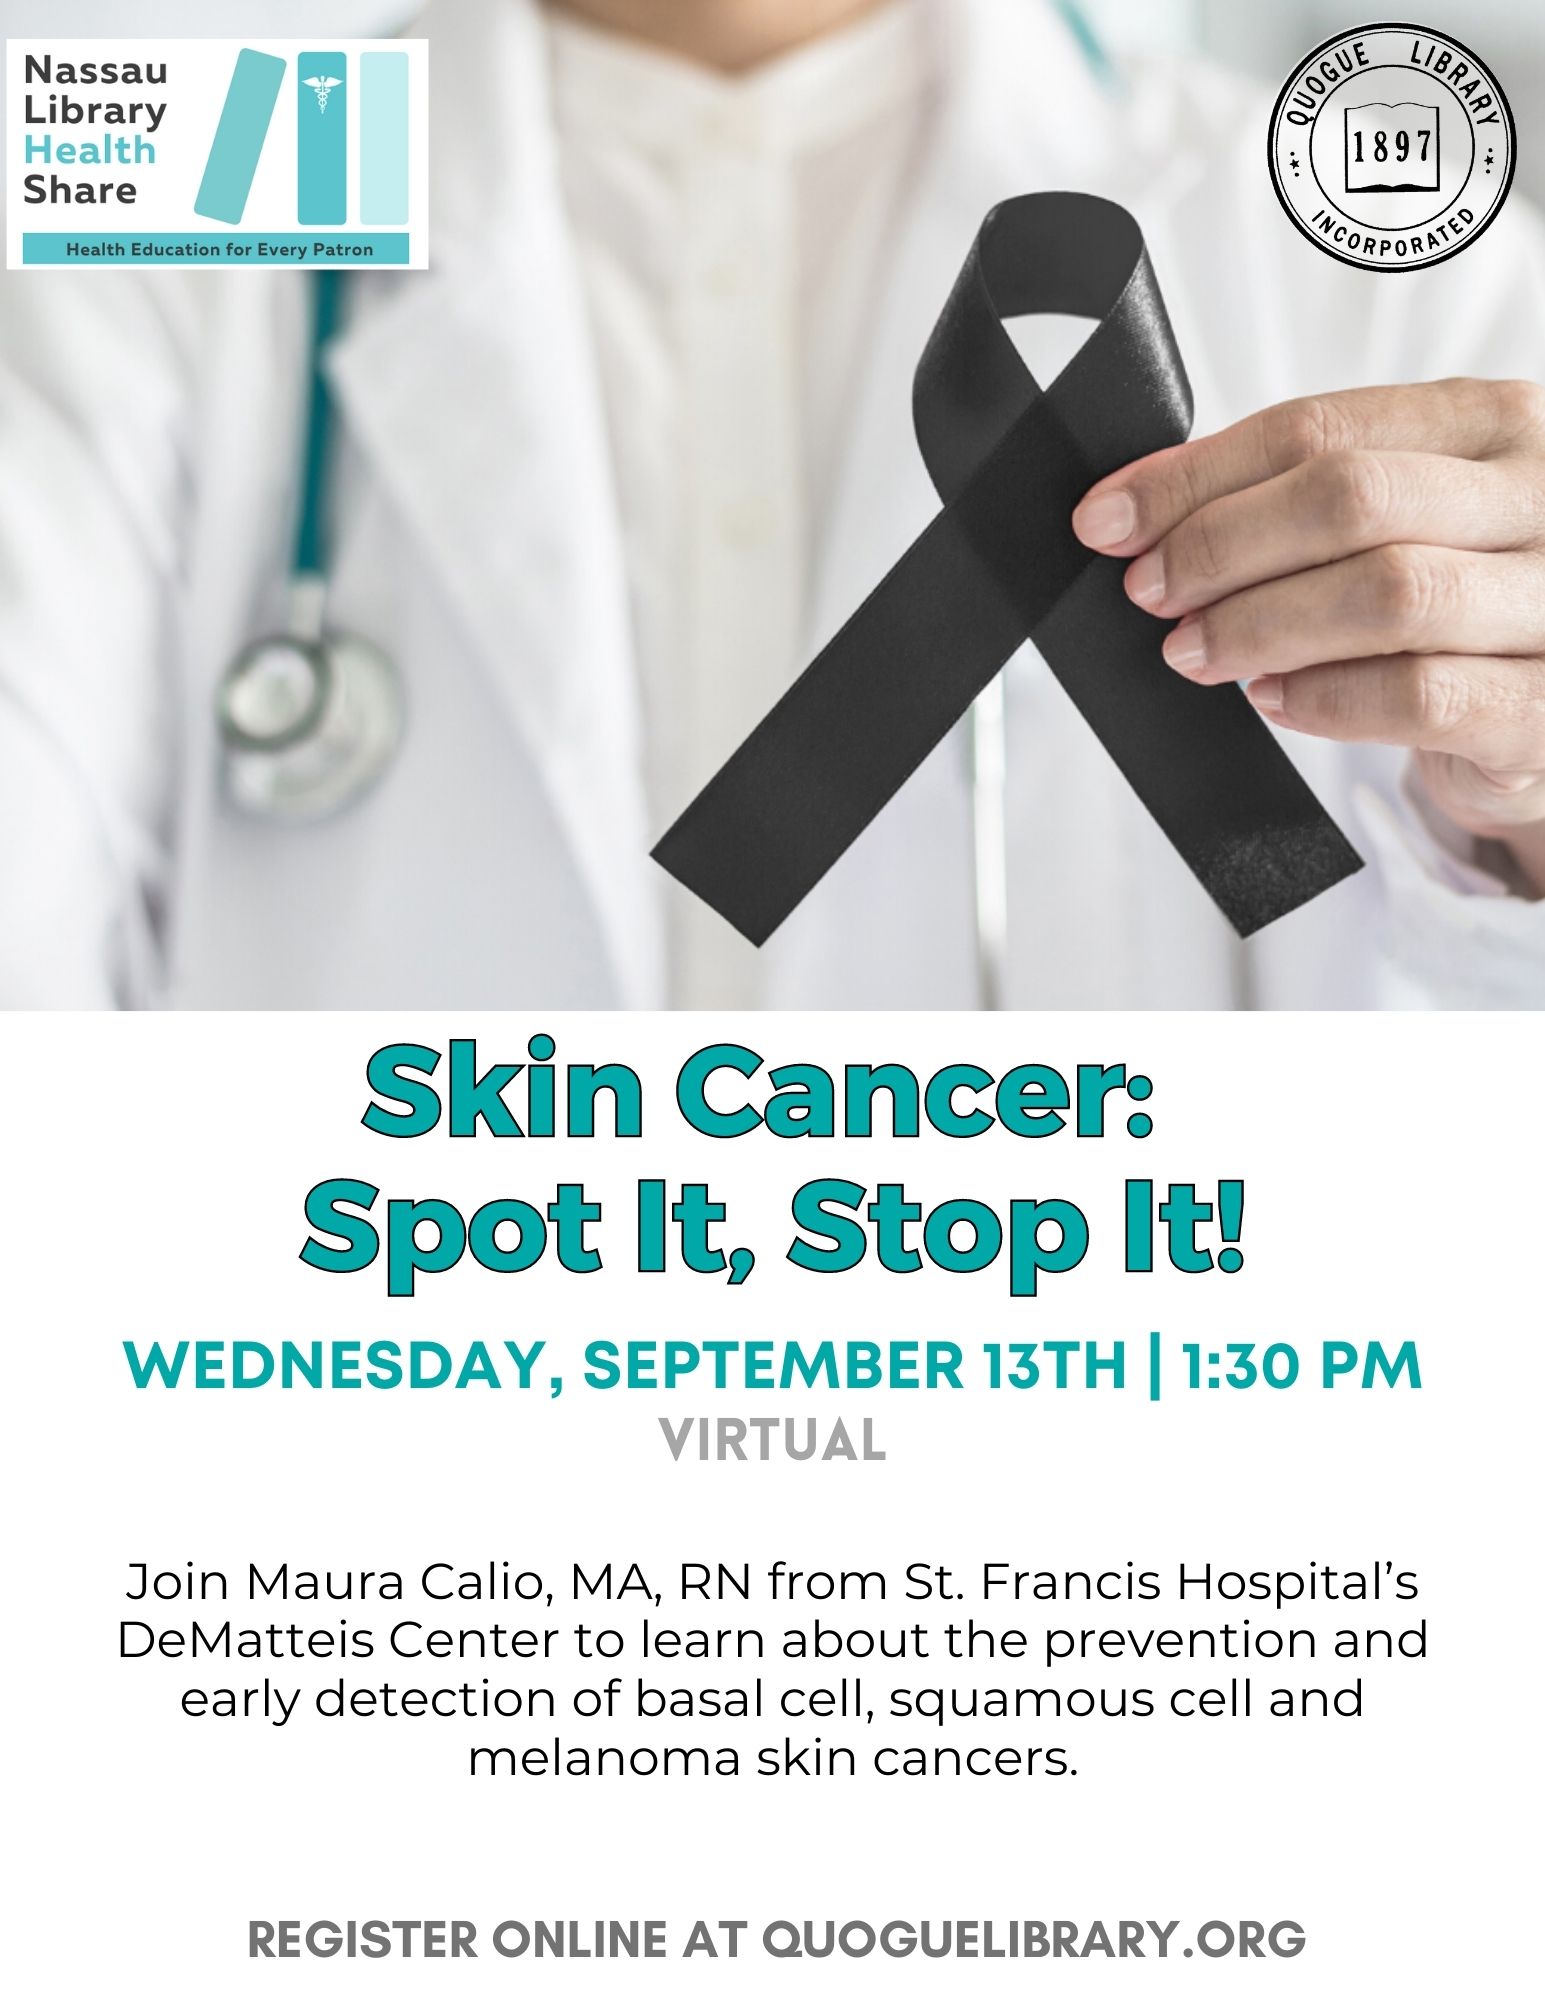 Skin Cancer Spot It, Stop It! Quogue Library